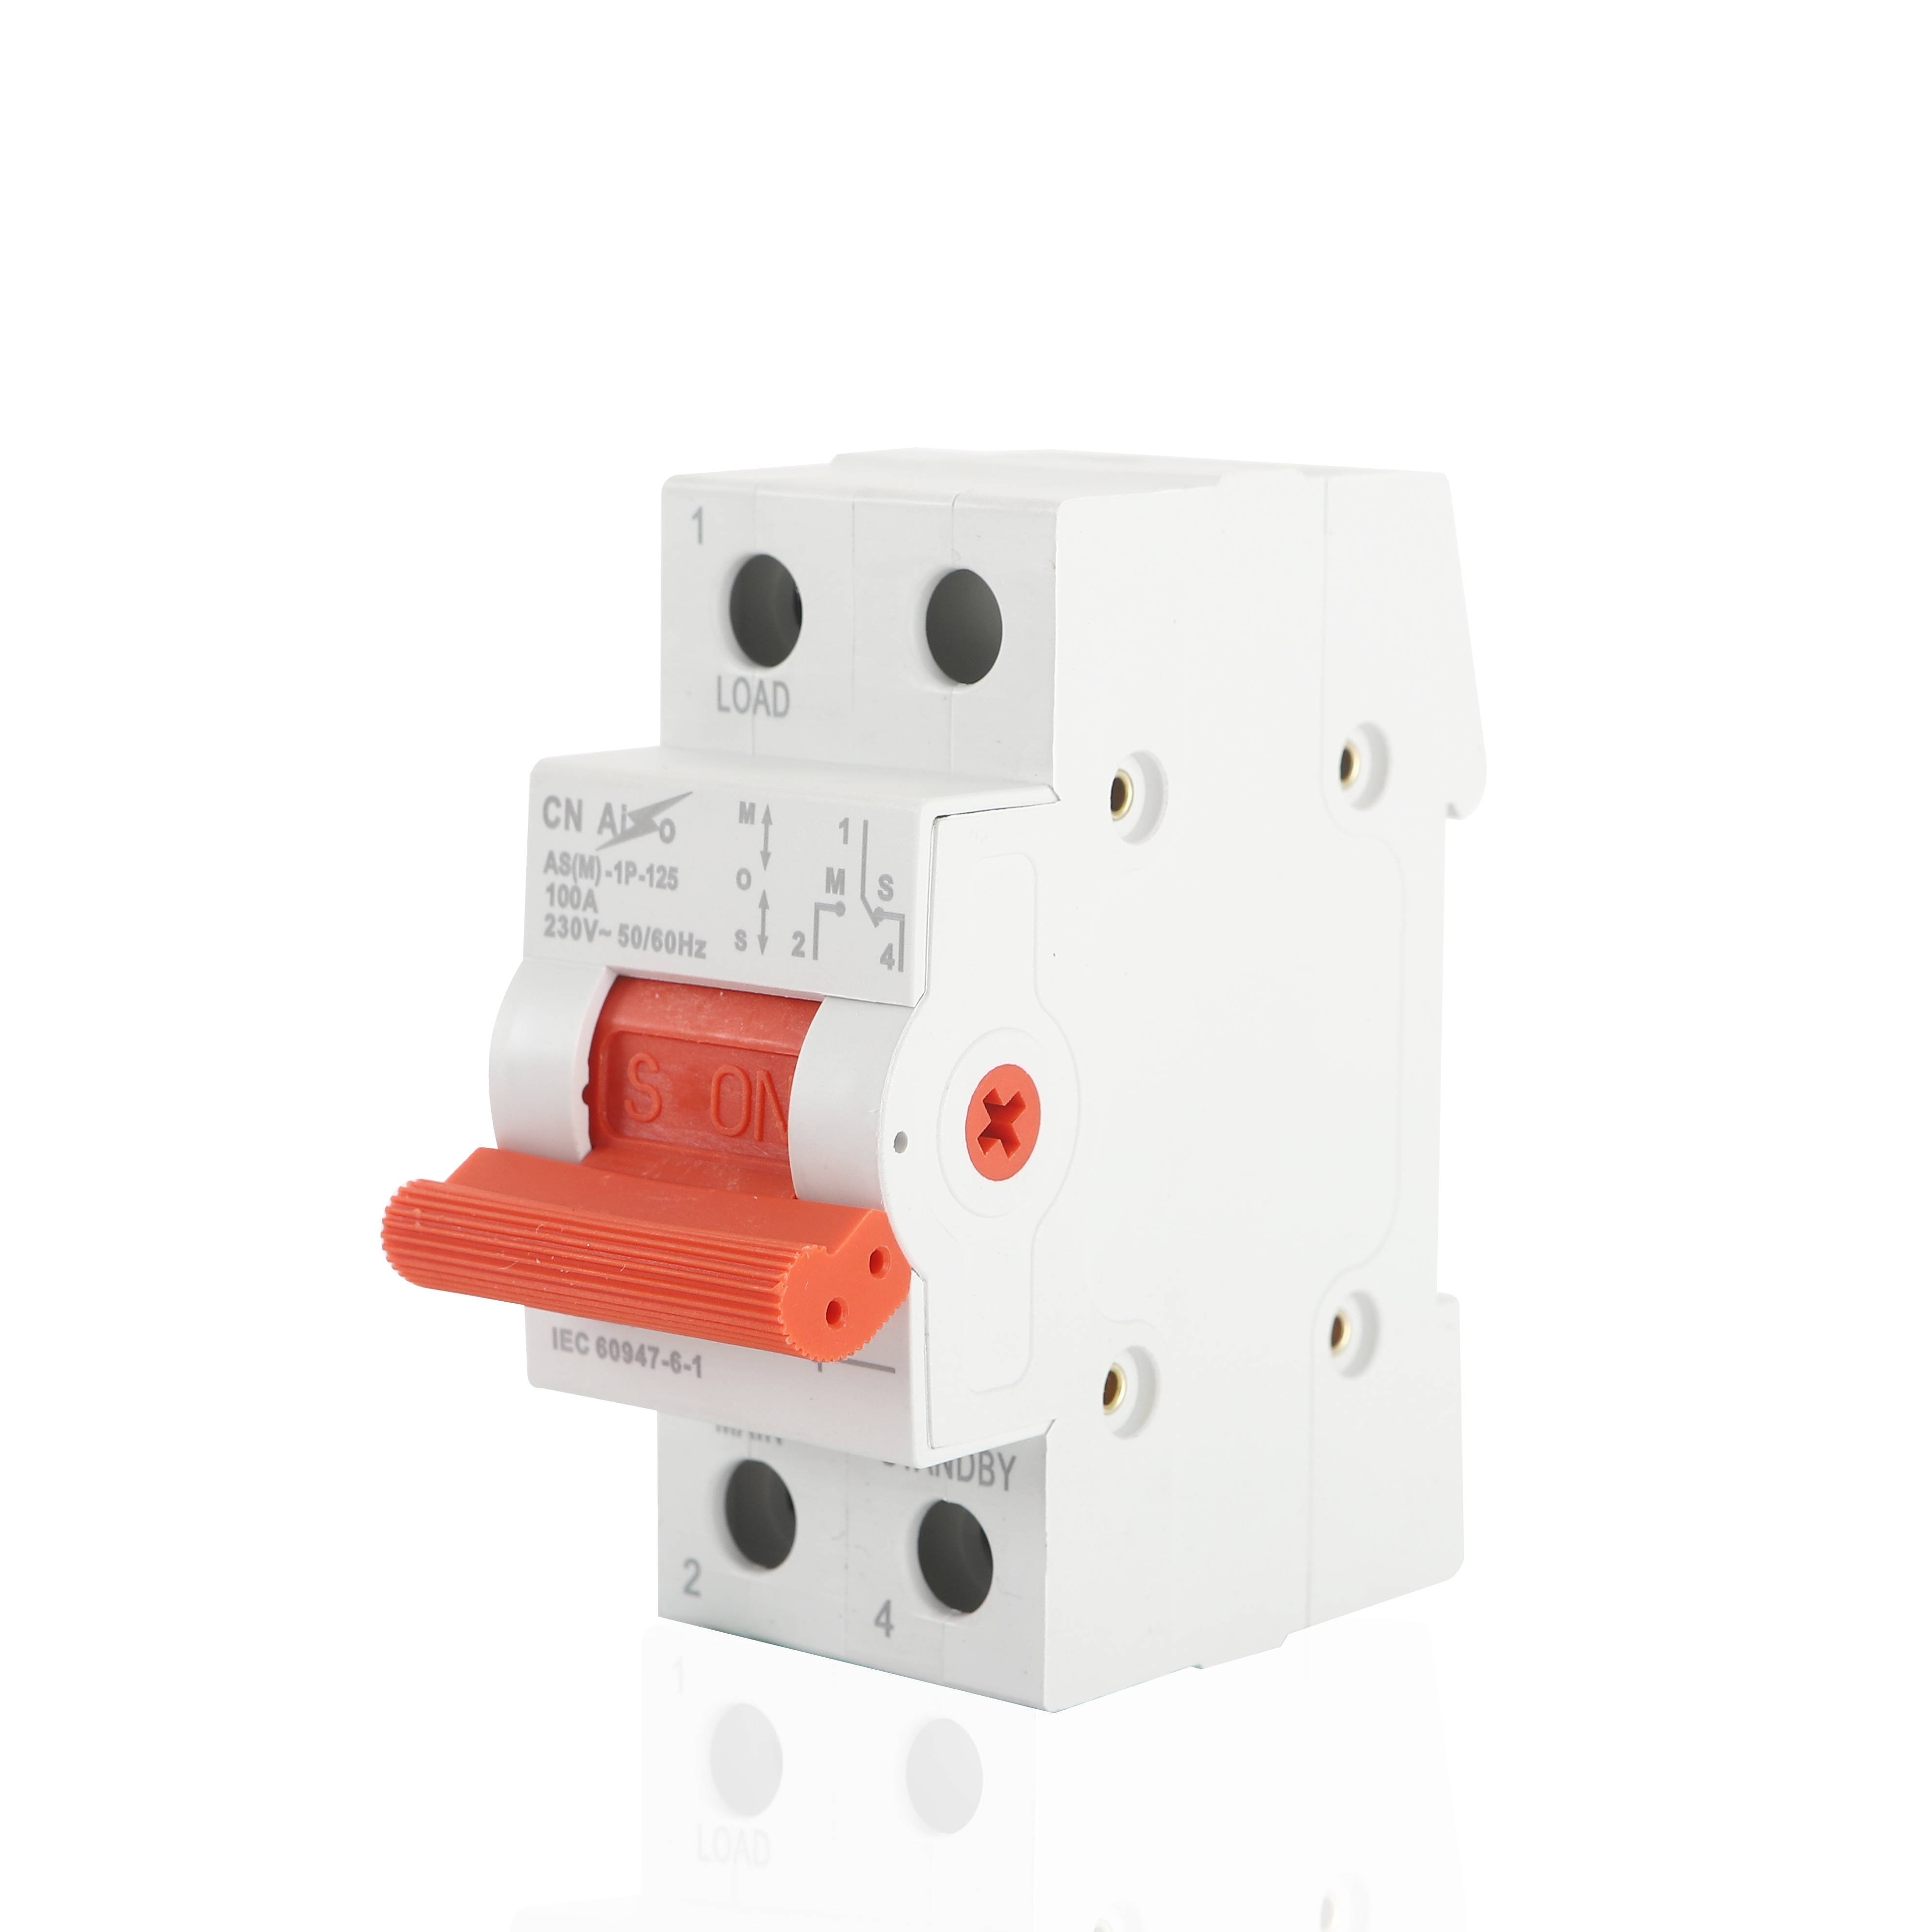 1P 100A Manual Transfer Changeover Switch